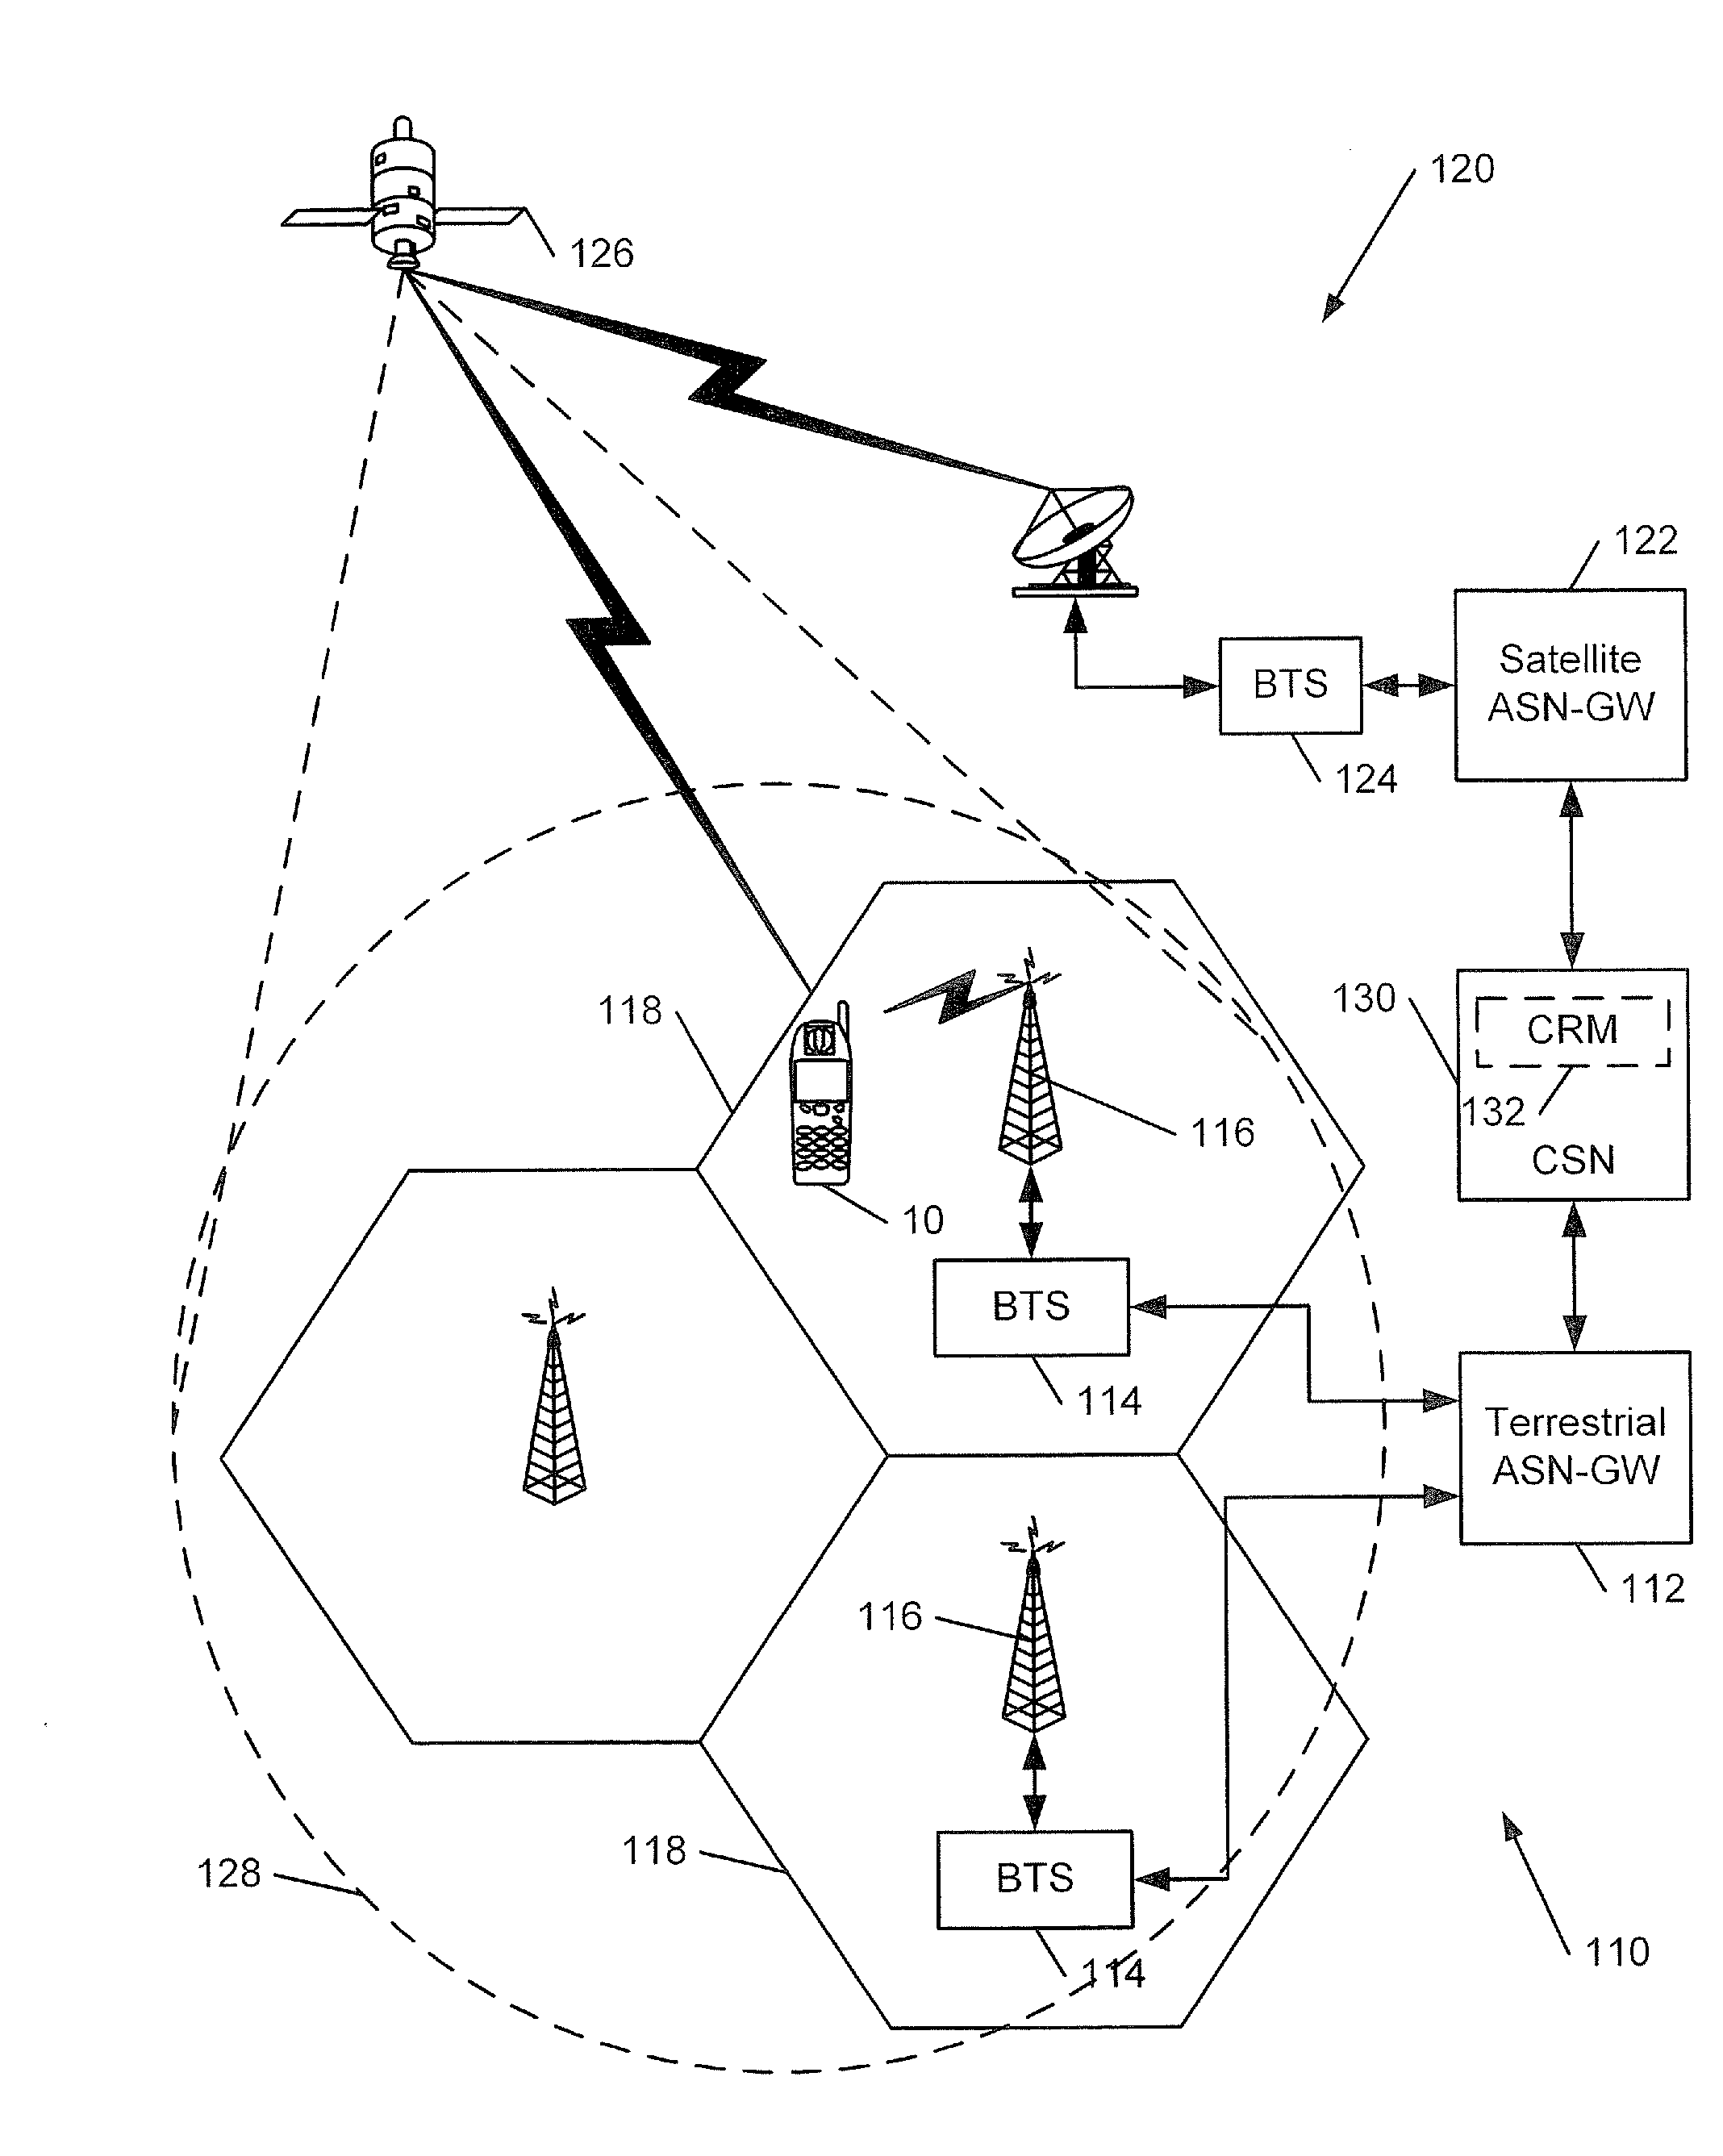 Apparatus and Methods for Mobility Management in Hybrid Terrestrial-Satellite Mobile Communications Systems